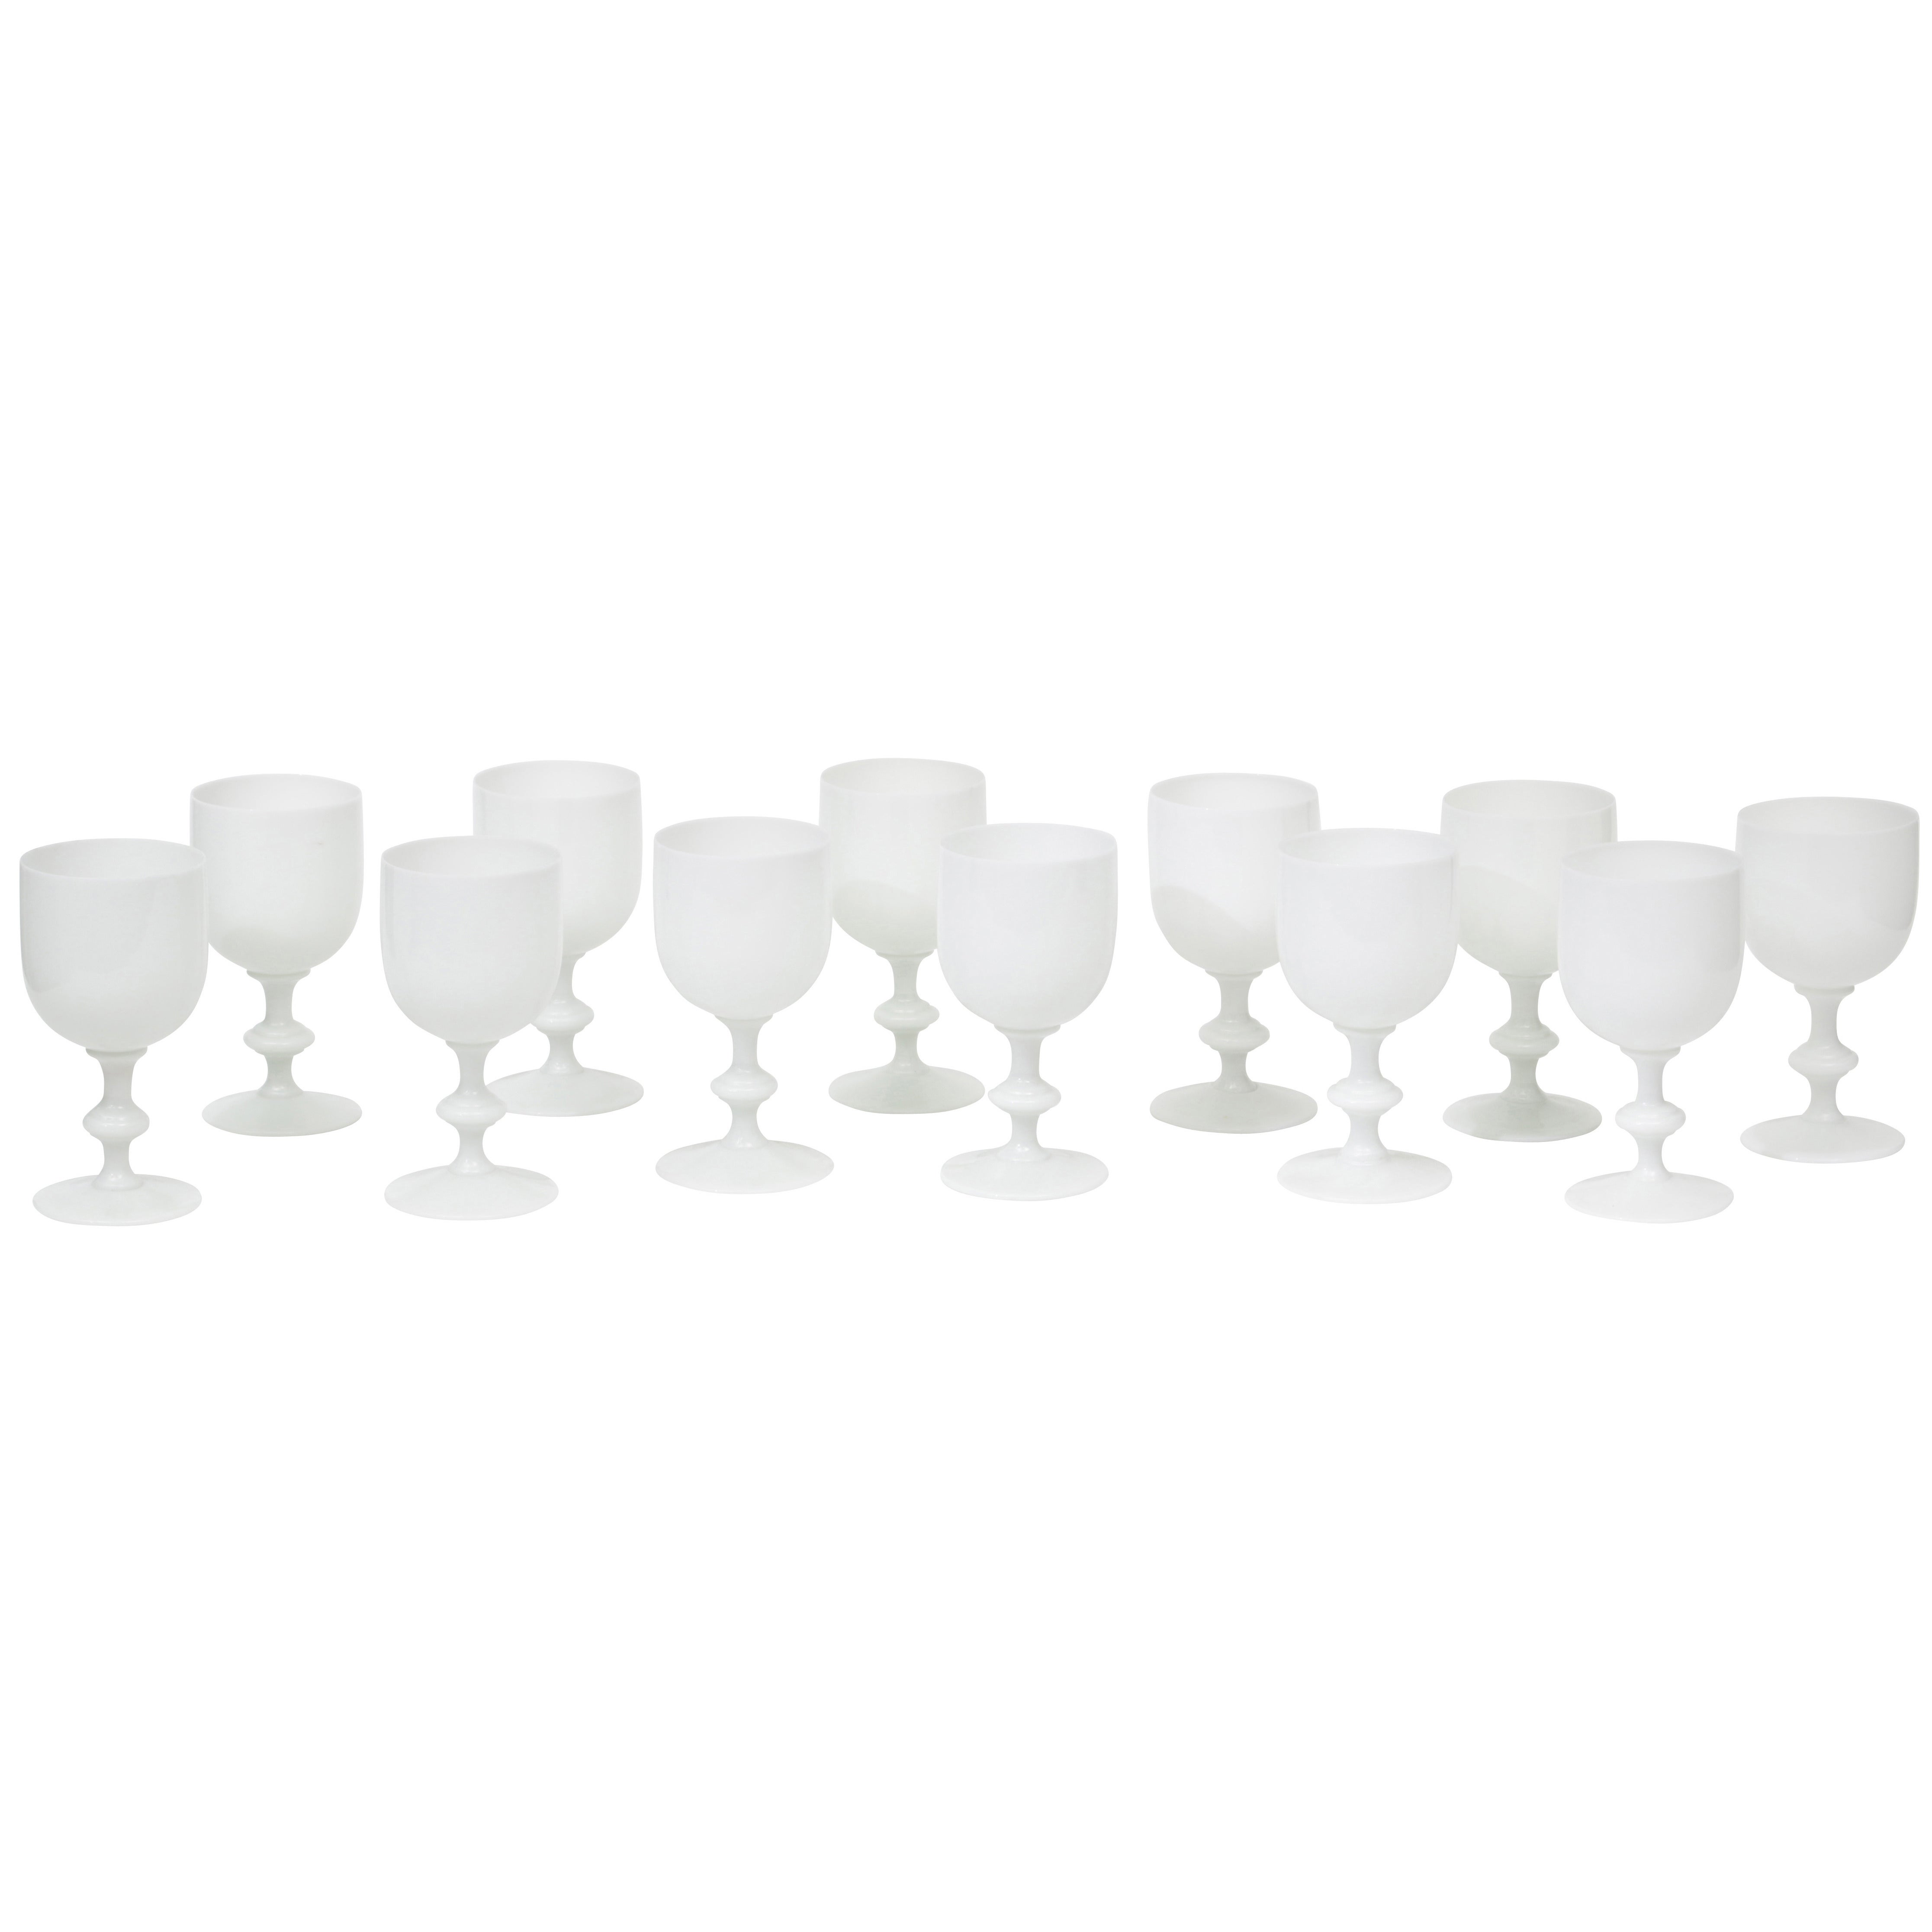  Set of 12 French Handblown Opaline Wine Goblets by Portieux Vallerysthal